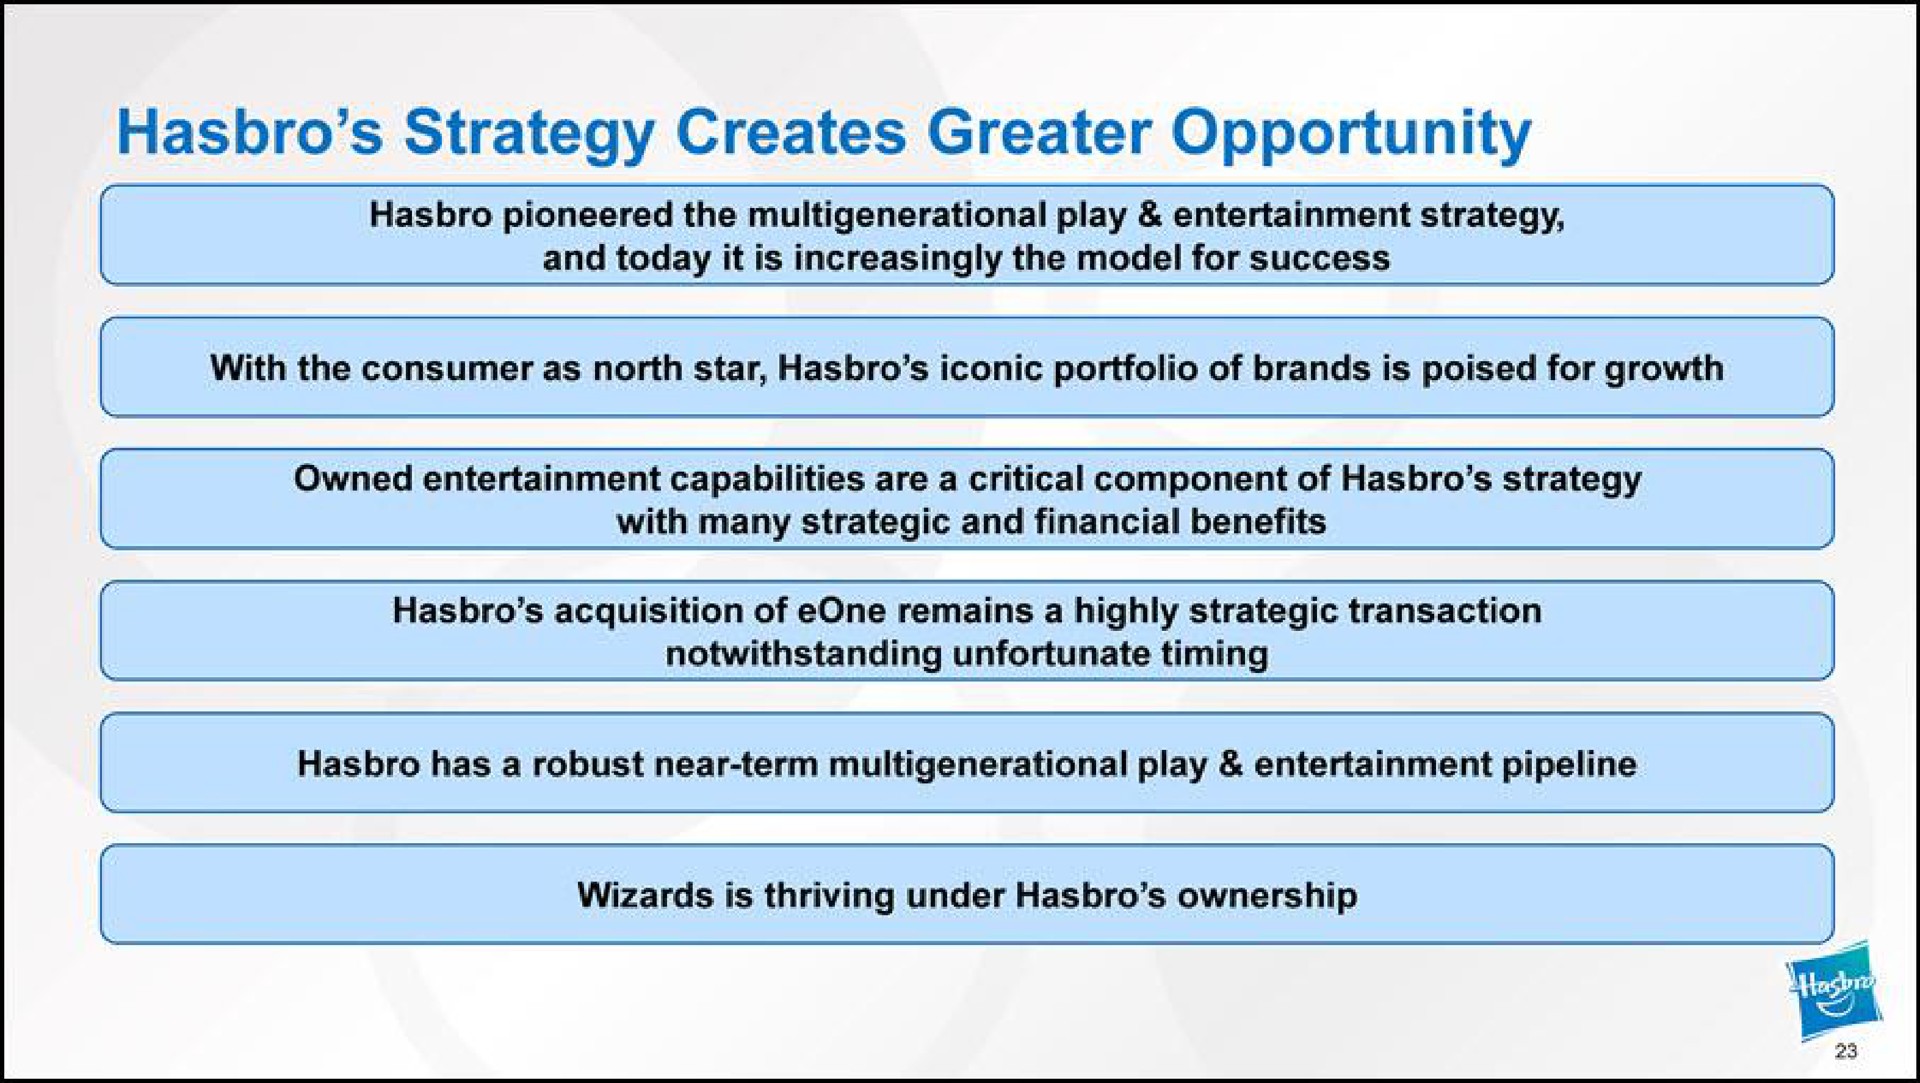 strategy creates greater opportunity pioneered the play entertainment strategy and today it is increasingly the model for success with the consumer as north star iconic portfolio of brands is poised for growth owned entertainment capabilities are a critical component of strategy with many strategic and financial benefits has a robust near term play entertainment pipeline acquisition of remains a highly strategic transaction notwithstanding unfortunate timing wizards is thriving under ownership | Hasbro